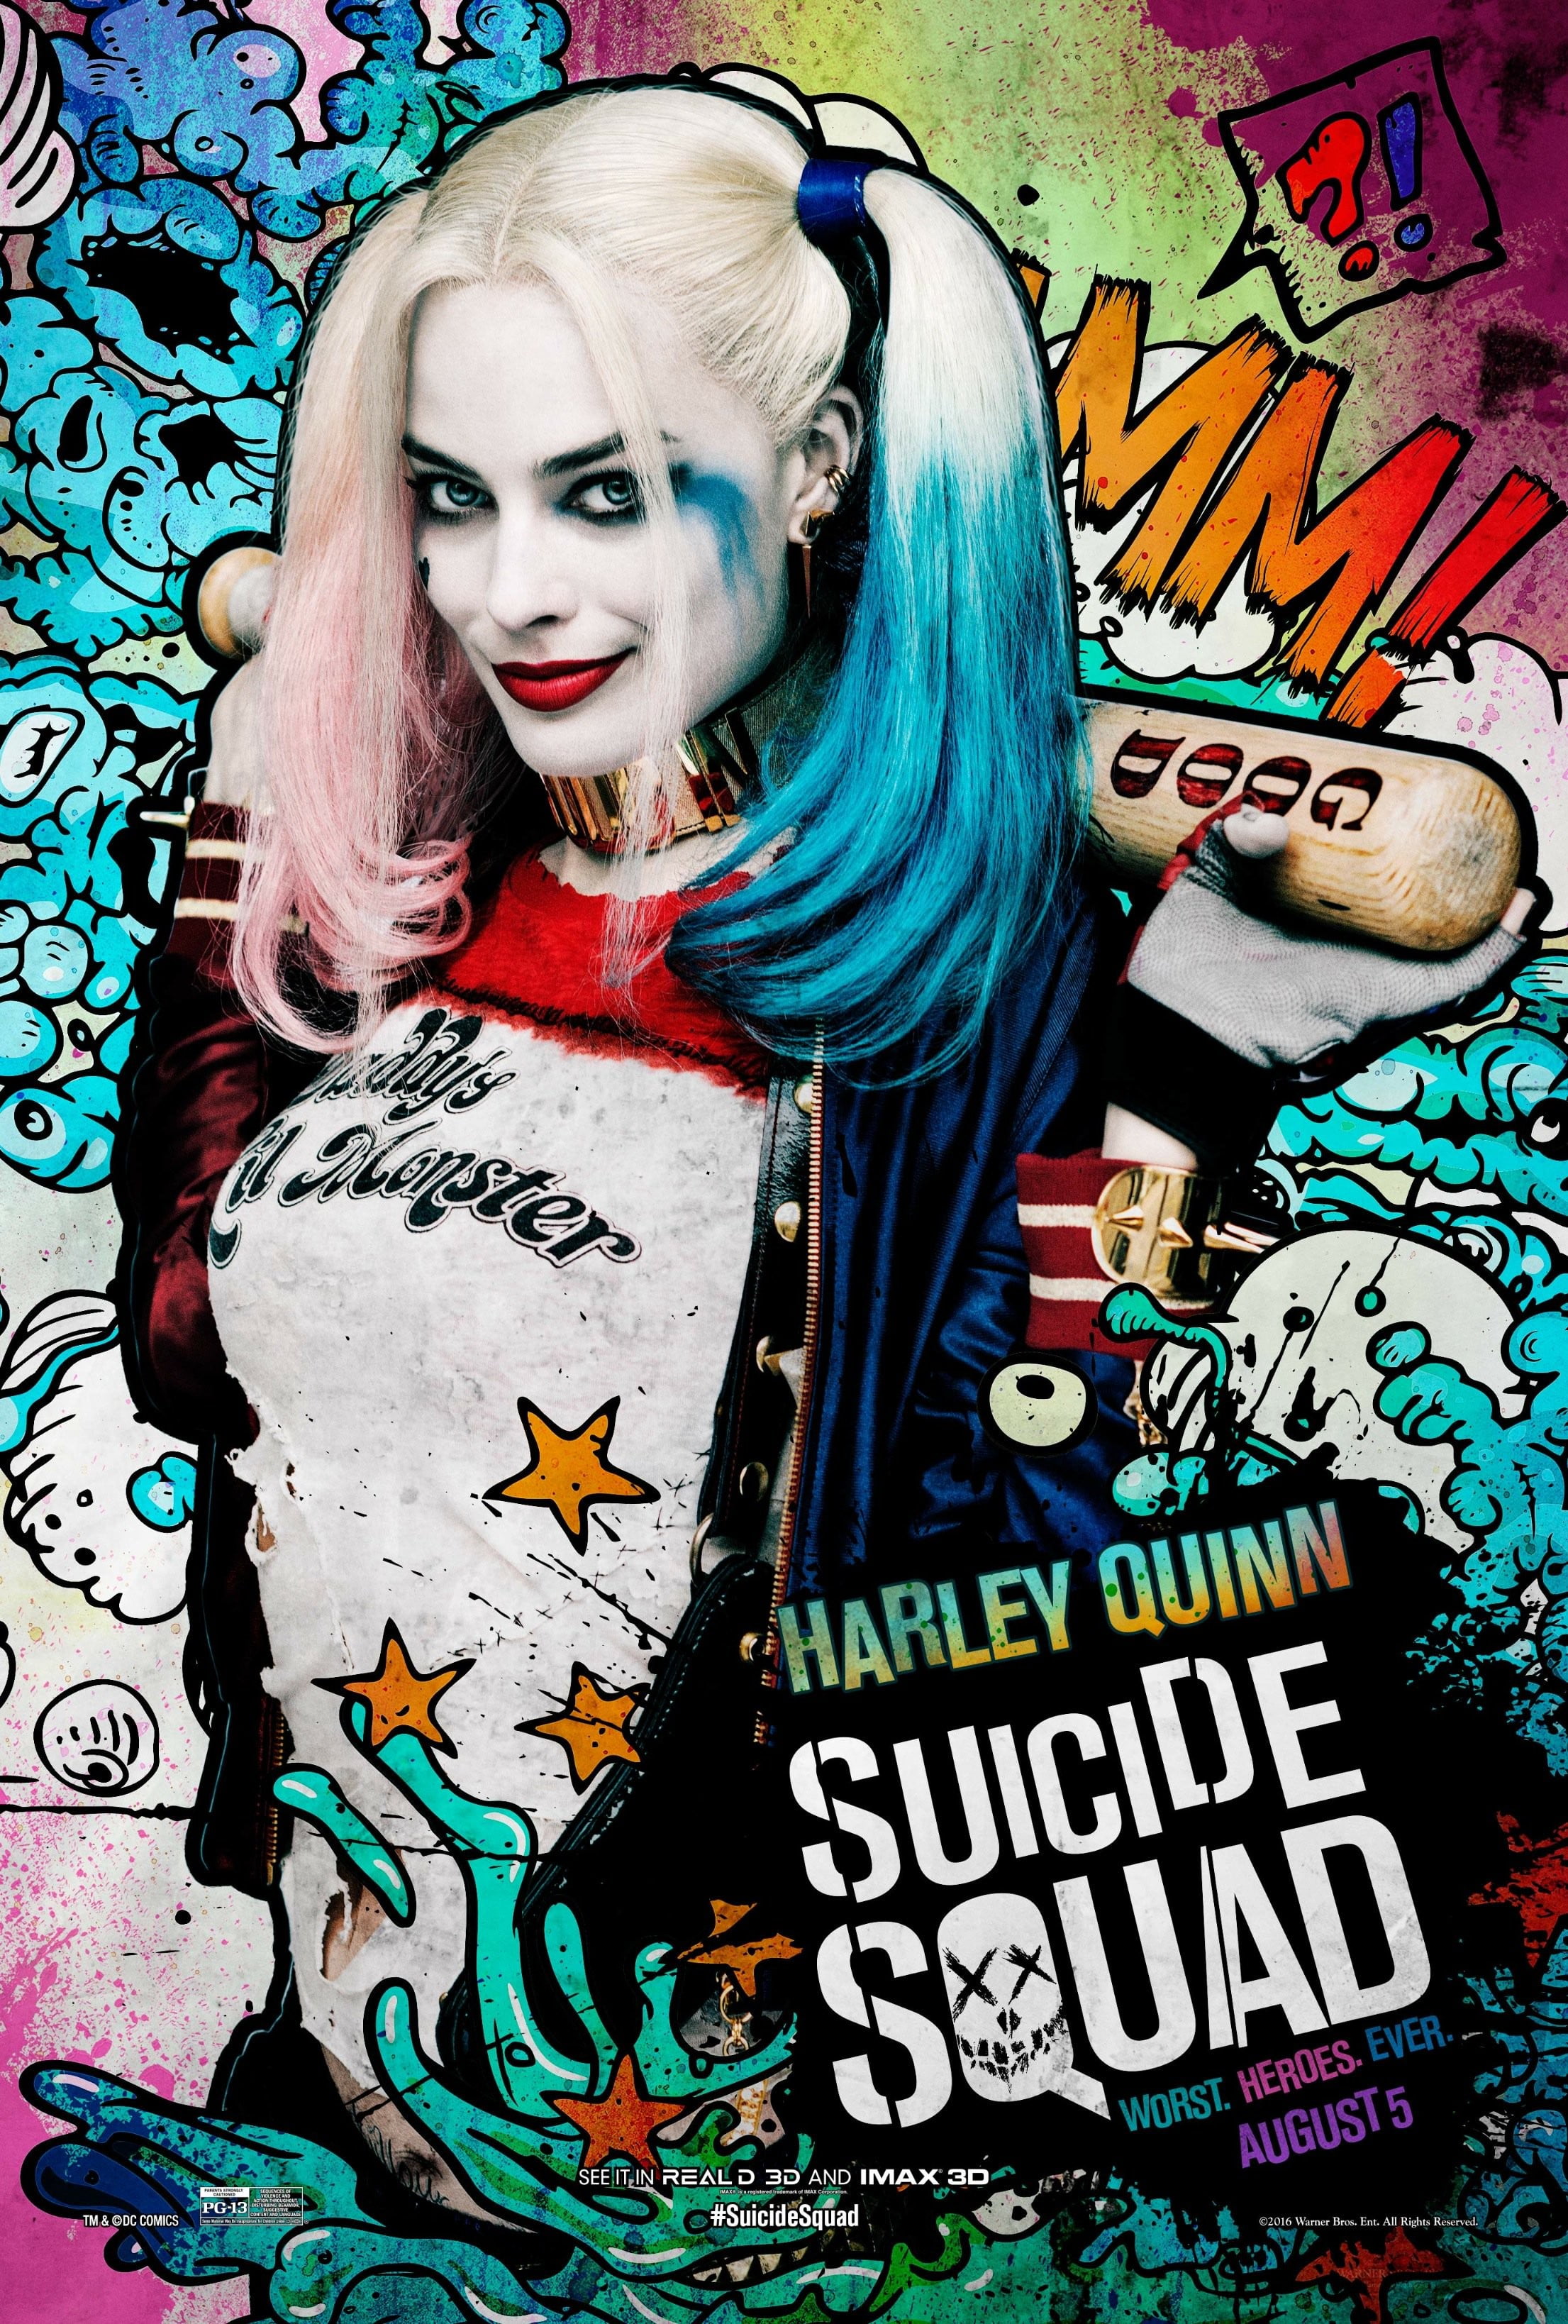 Featured image of post Joker And Harley Quinn Wallpaper Hd Tab 1 1 2732x2732 tab 1 1 3840x3840 vga 4 3 240x320 vga 4 3 480x640 vga 4 3 600x800 vga 4